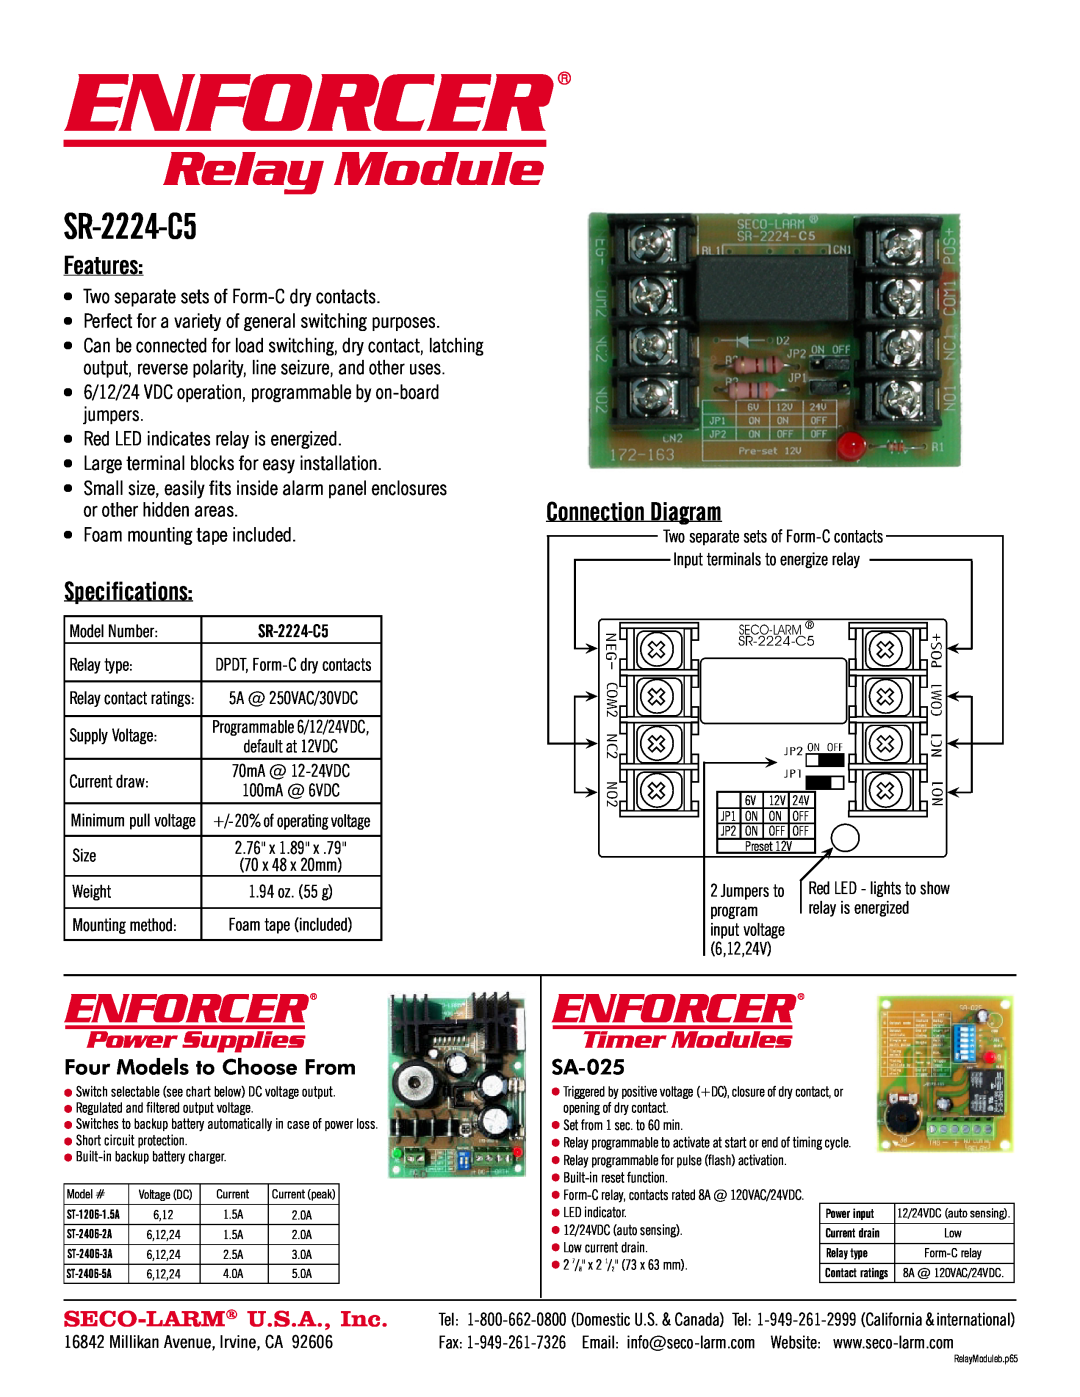 SECO-LARM USA SR-2224-C5 specifications Enforcer, Relay Module, Features, Specifications, Connection Diagram, SA-025 